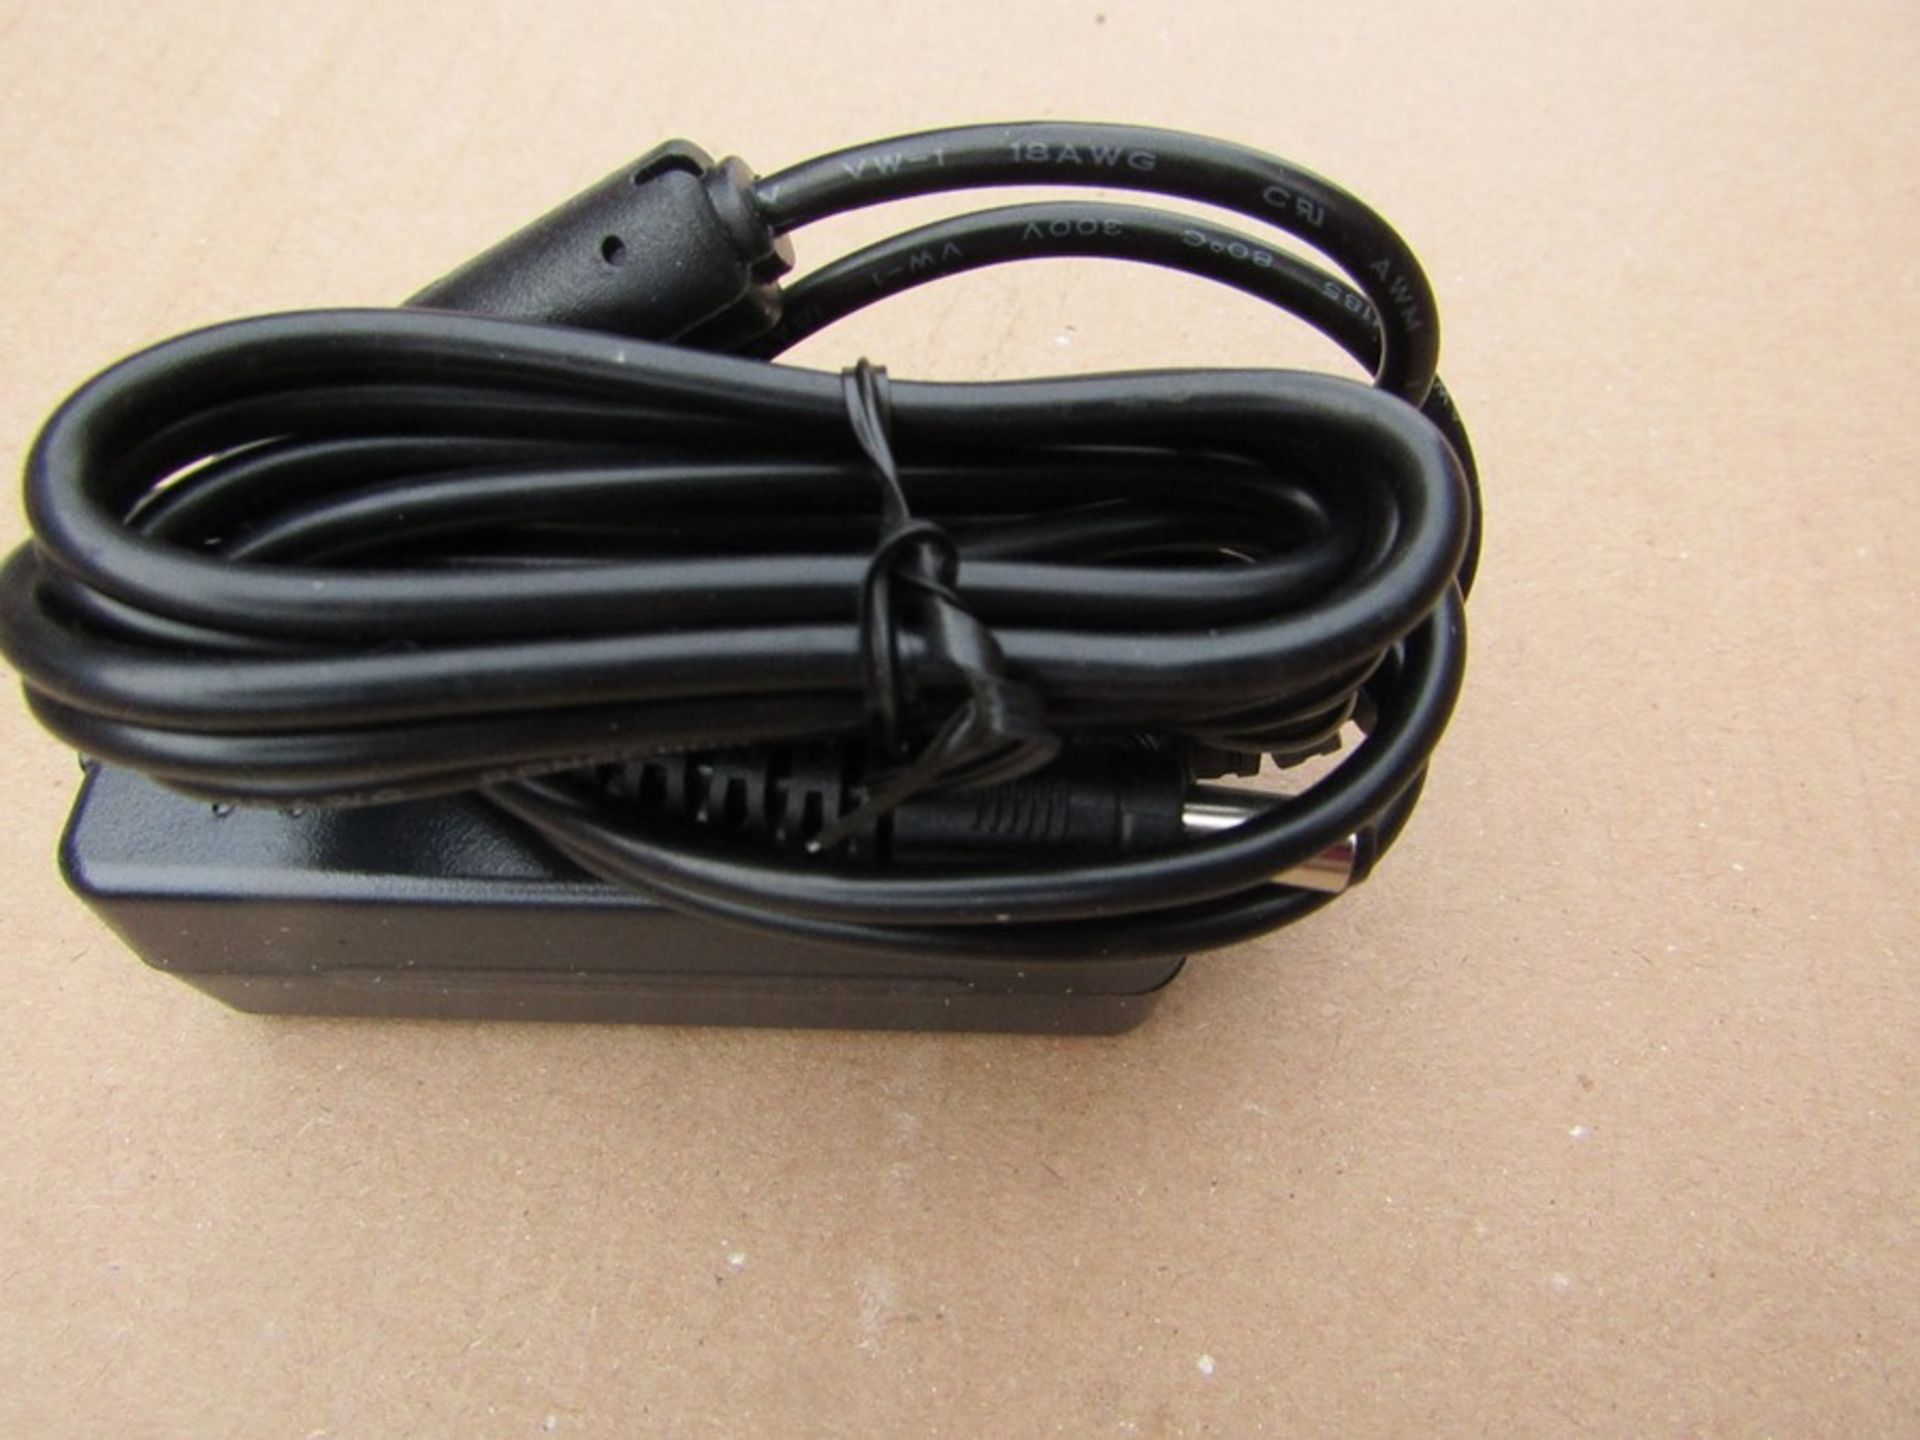 54 x 5V dc Power Supply for Laptop, Netbook or Notebook, 2.5A, 2-Pin - B714 435869